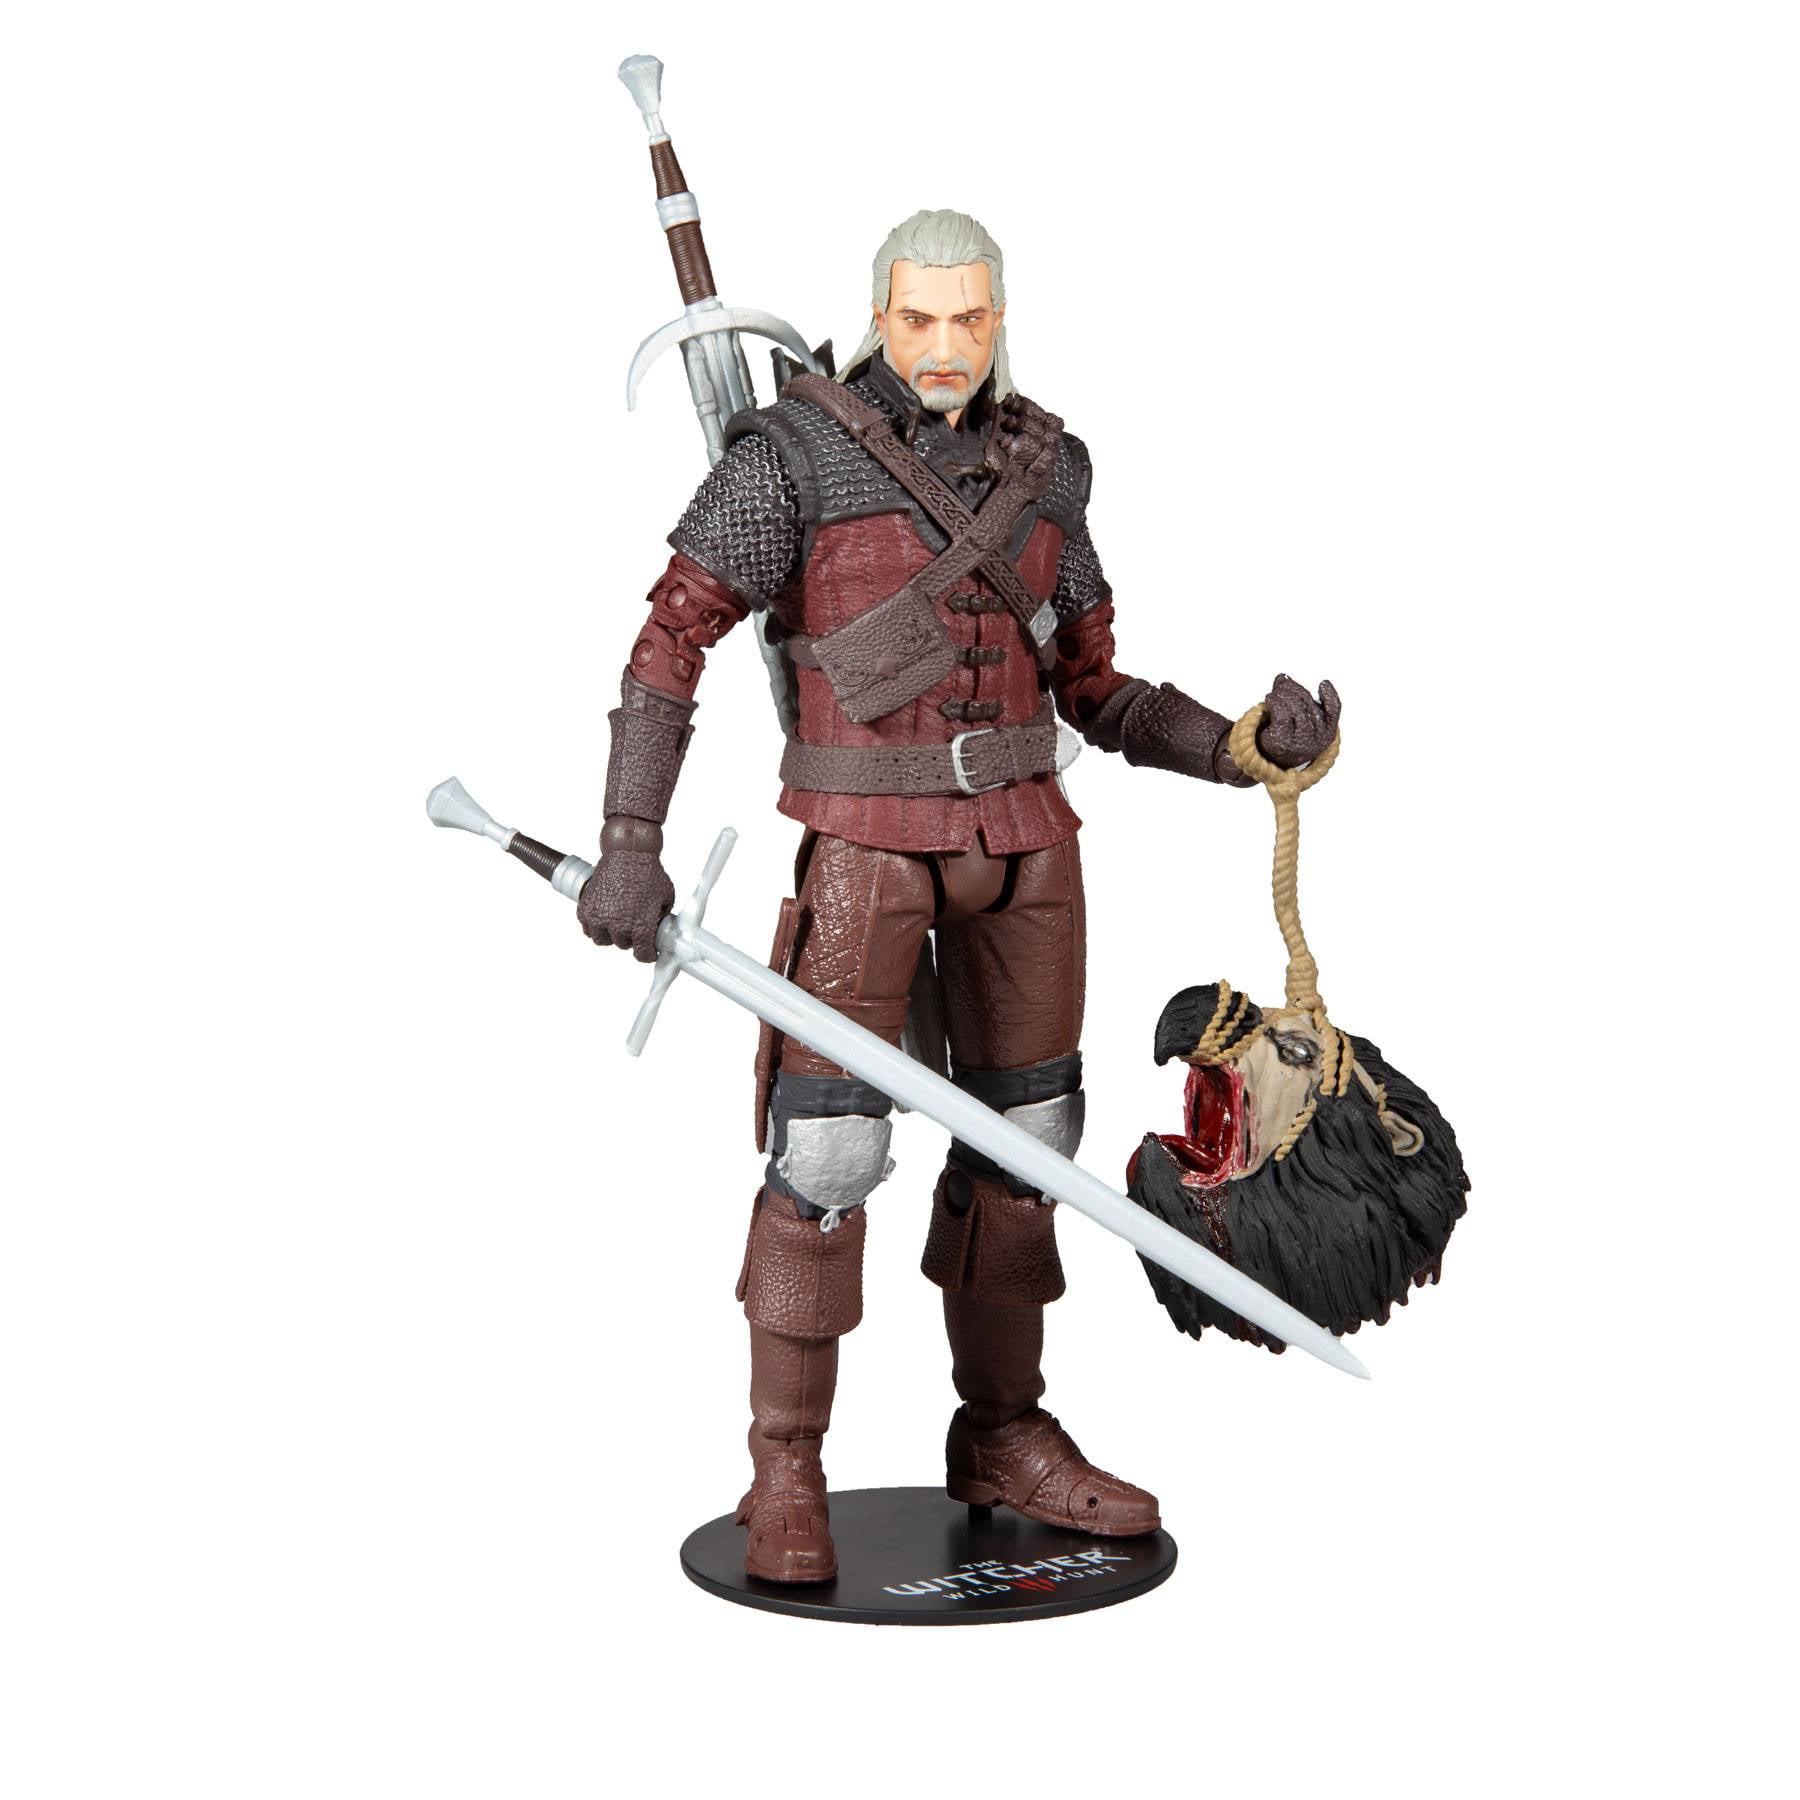 McFarlane ToysThe Witcher Geralt Of Rivia Action Figure for sale online Gold Label Series Action Figure 